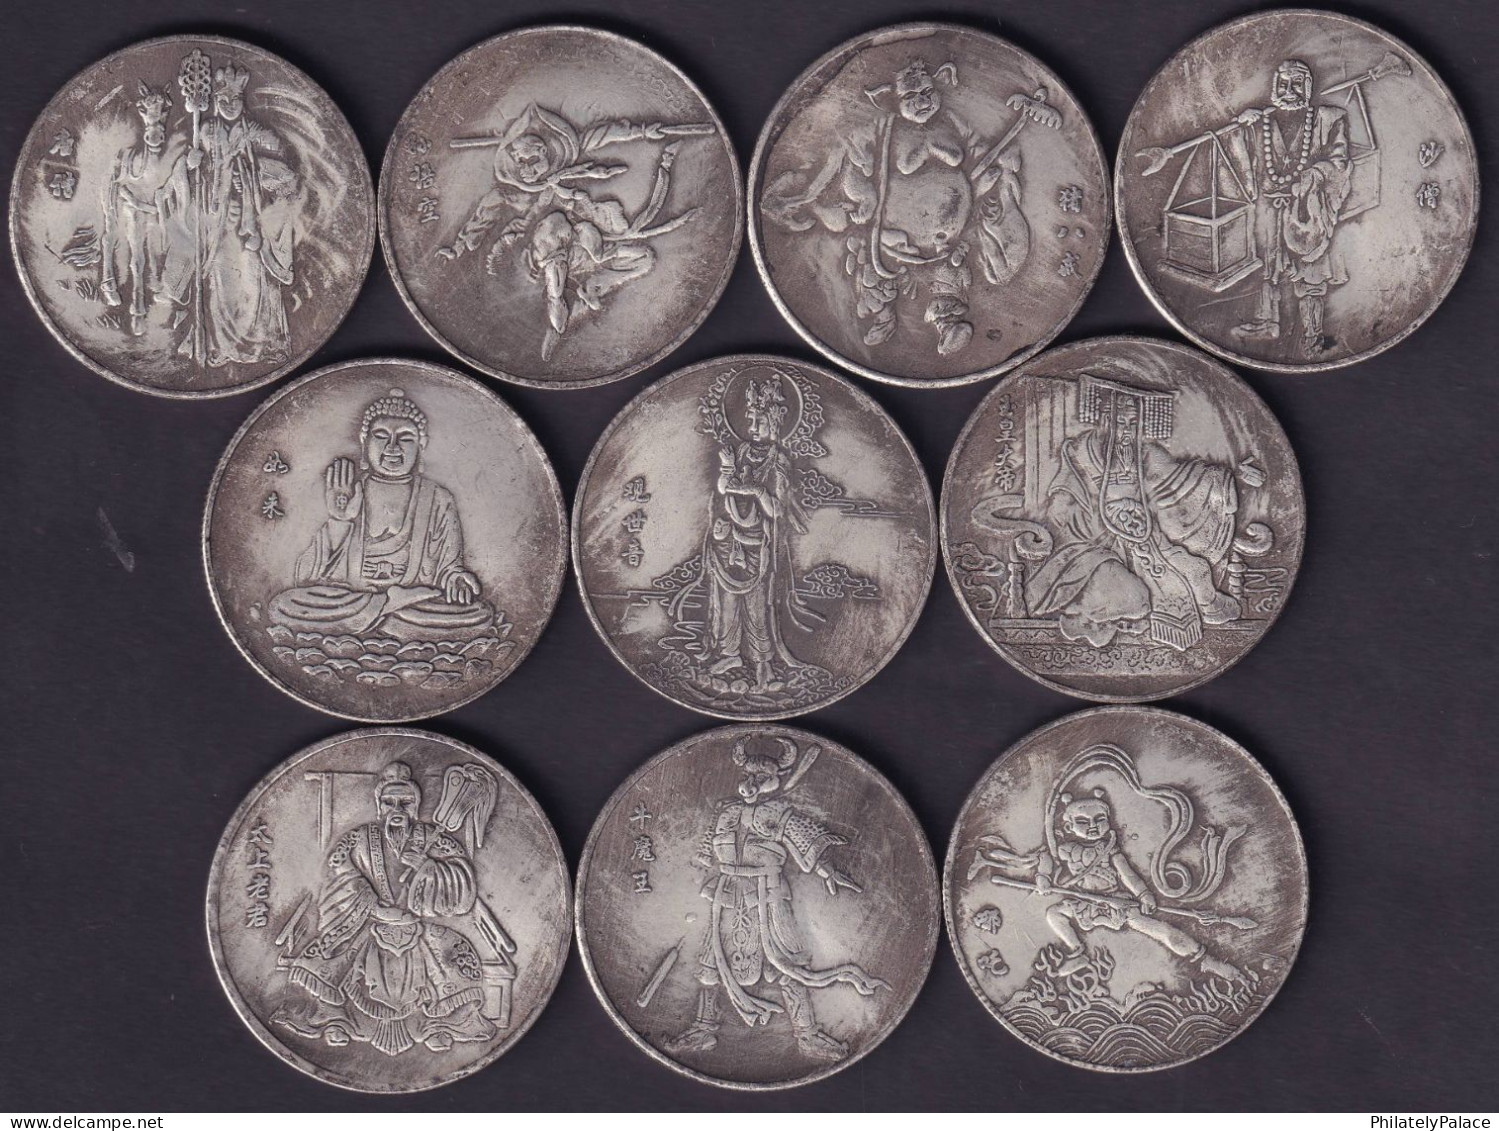 China Archize Journey to the West Commemorative Coins set of 10 Immortals in Legend, Monkey King, Buddha,  (**) RARE SET